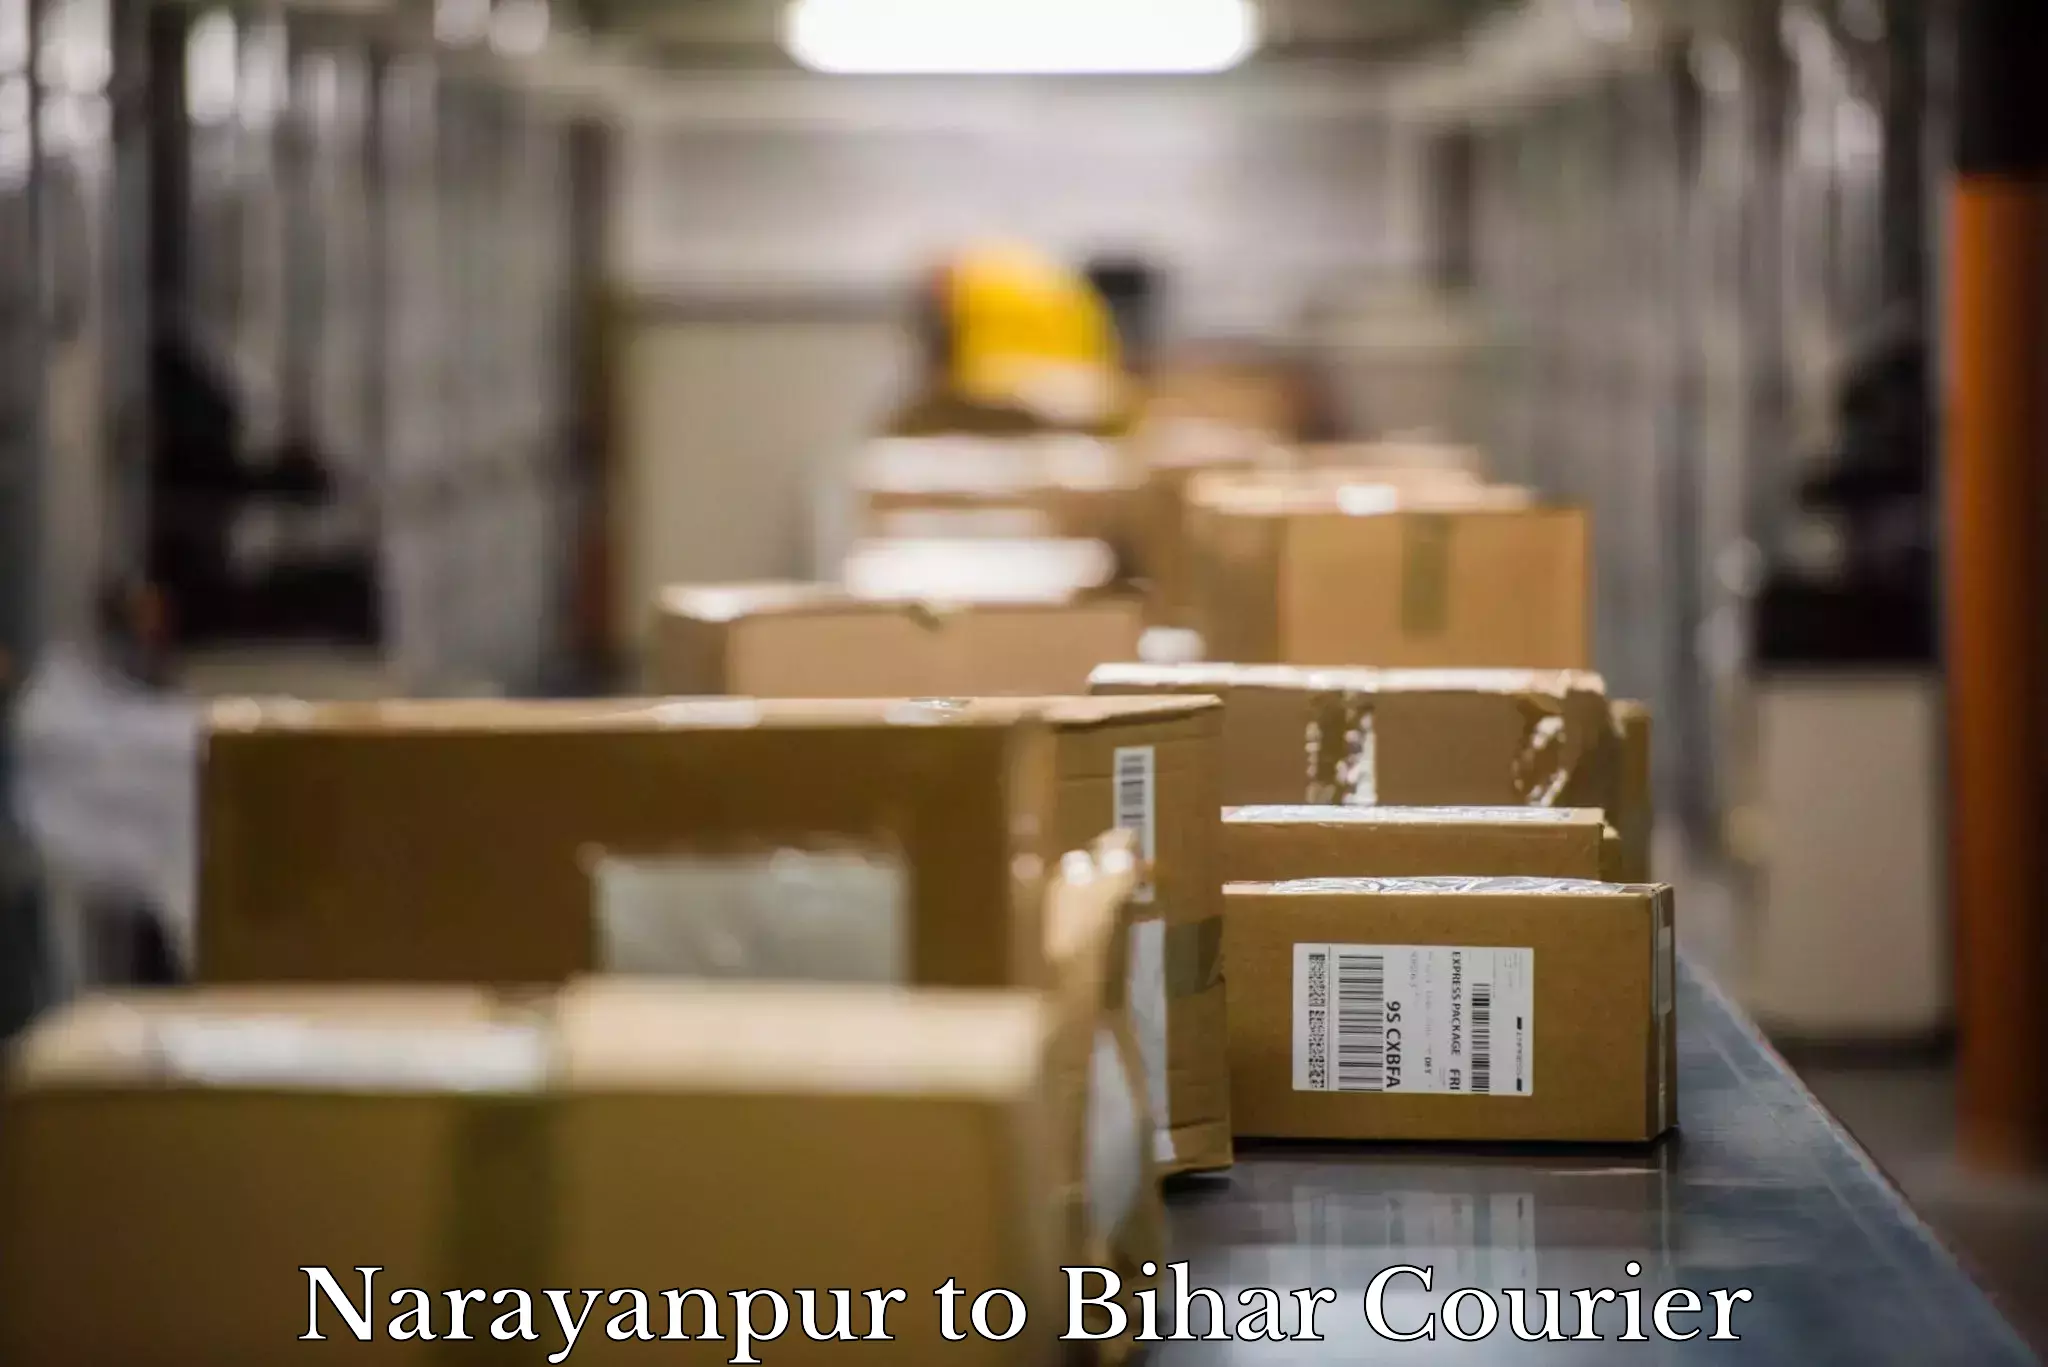 Professional packing services Narayanpur to Rajpur